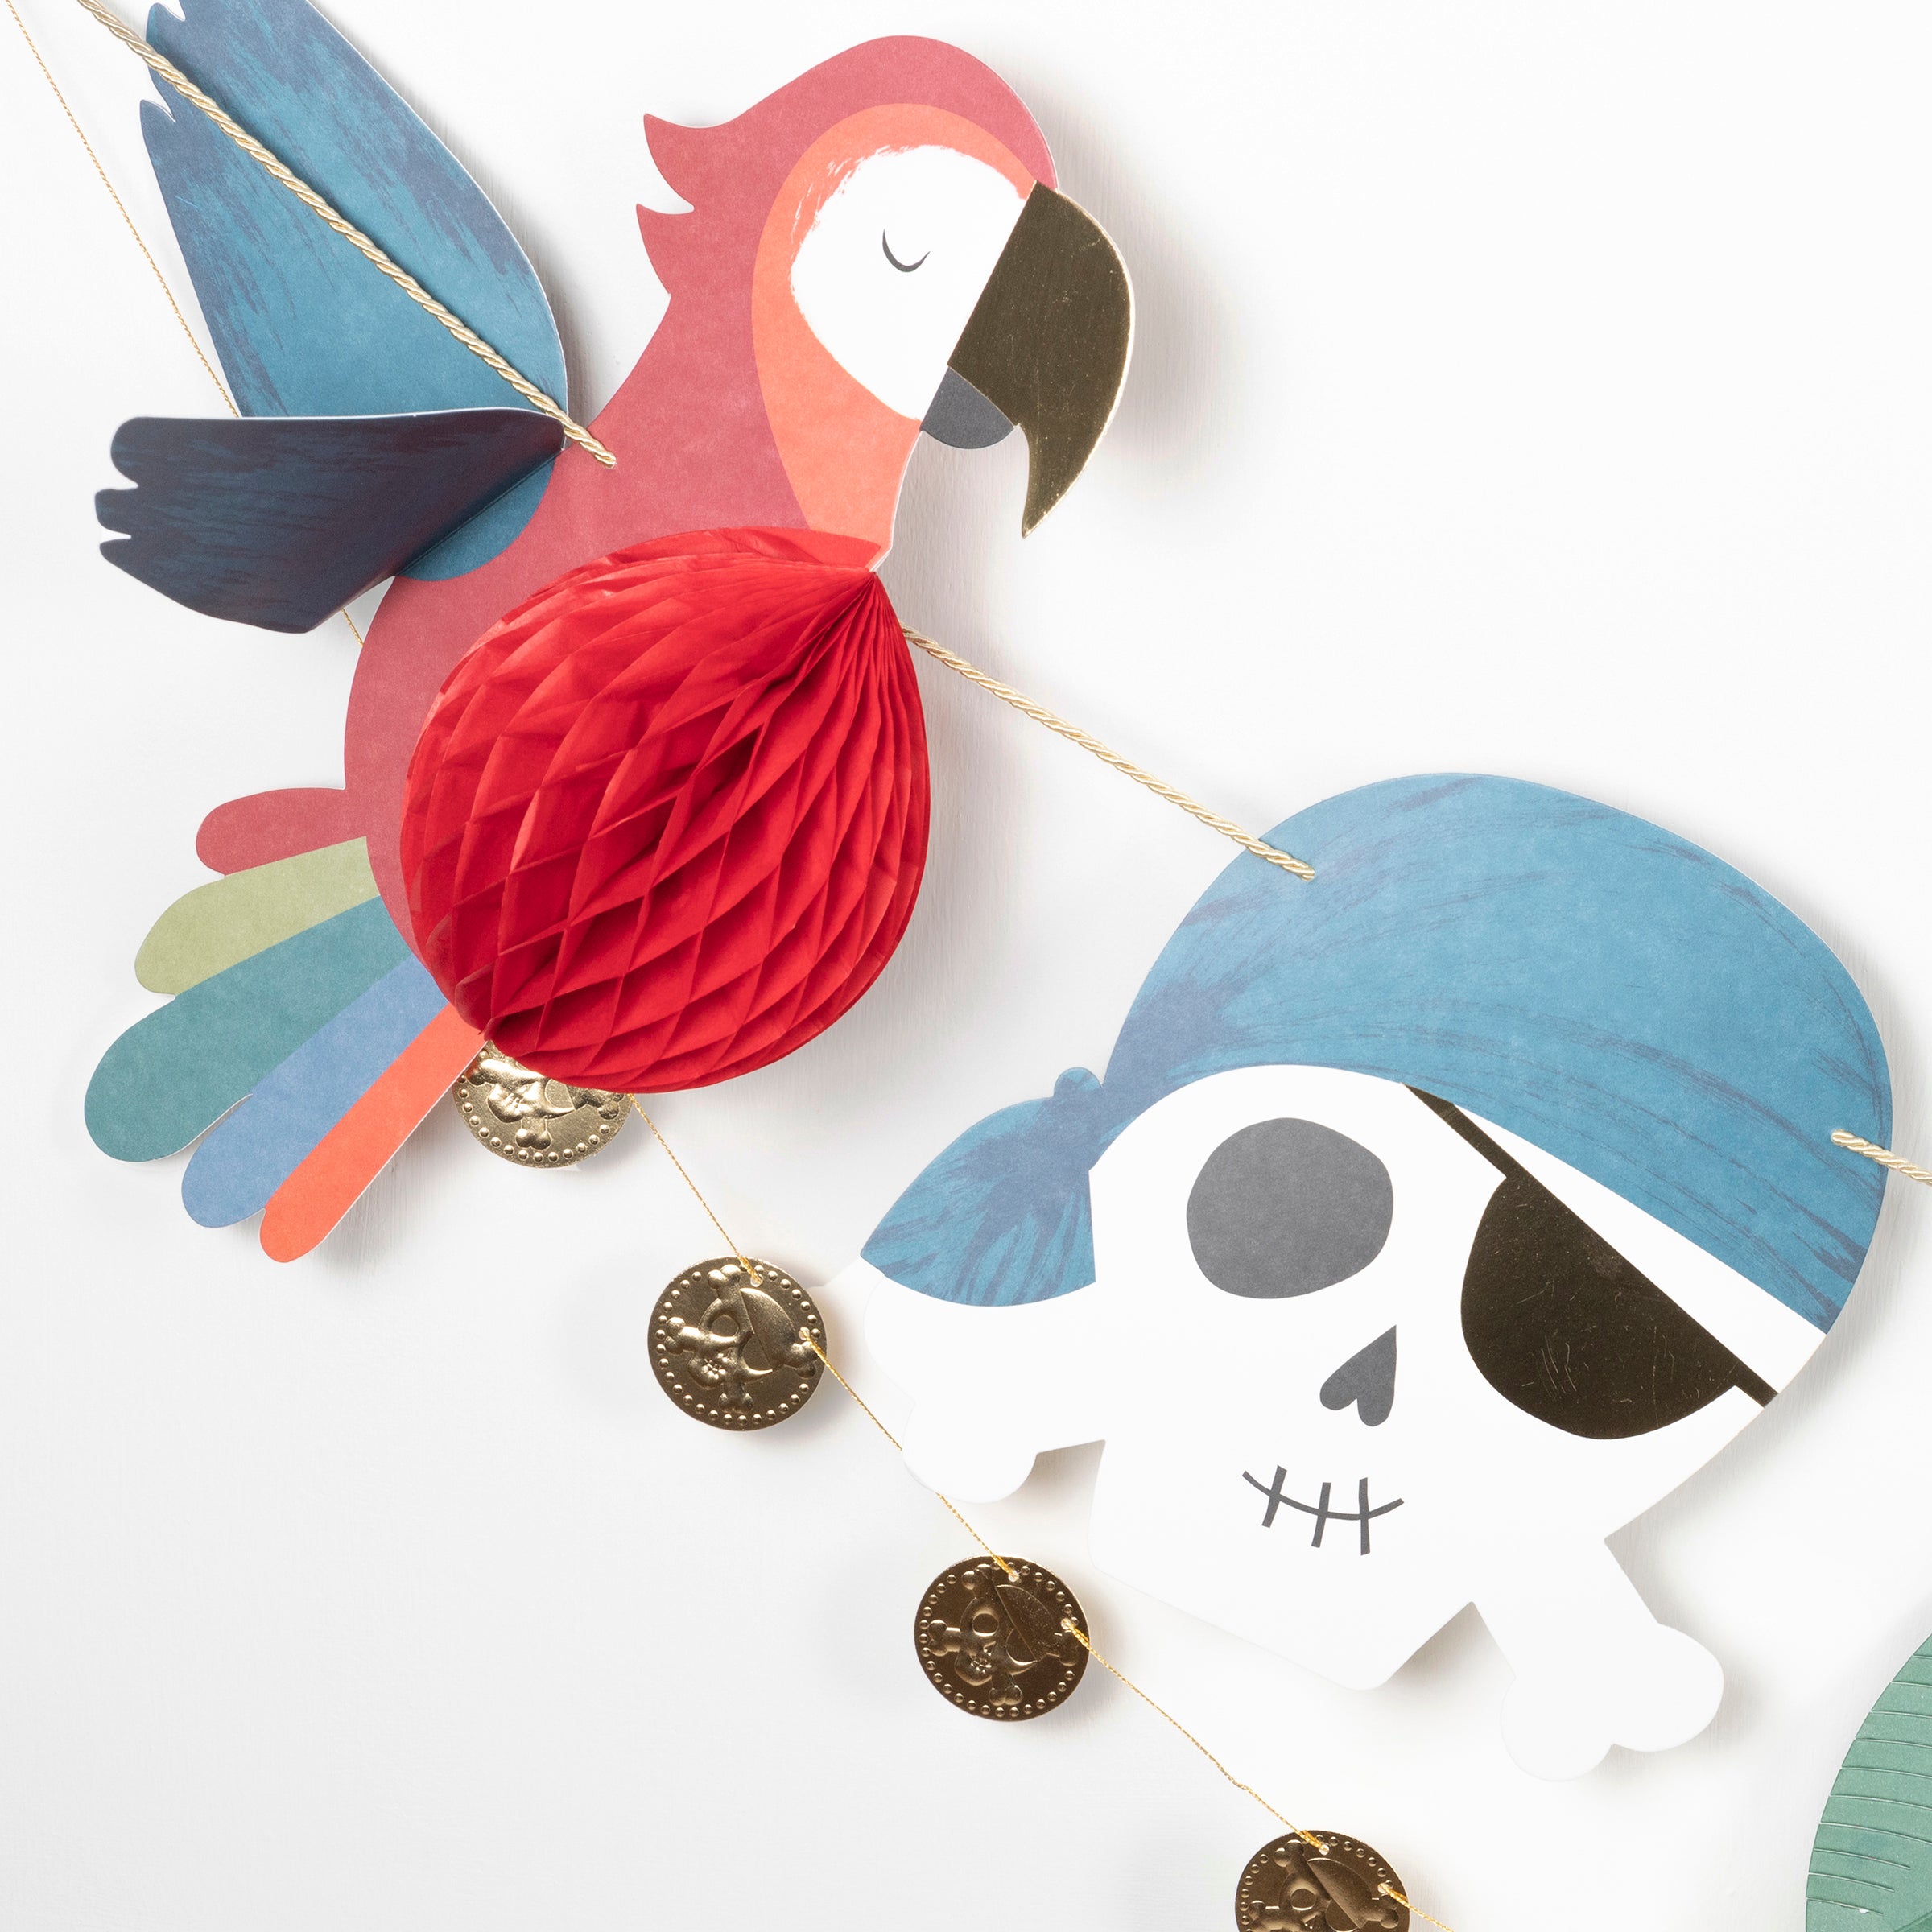 Our party garland is perfect for a pirate birthday party as it features pirate decorations including skull-and-crossbones and a pirate ship.